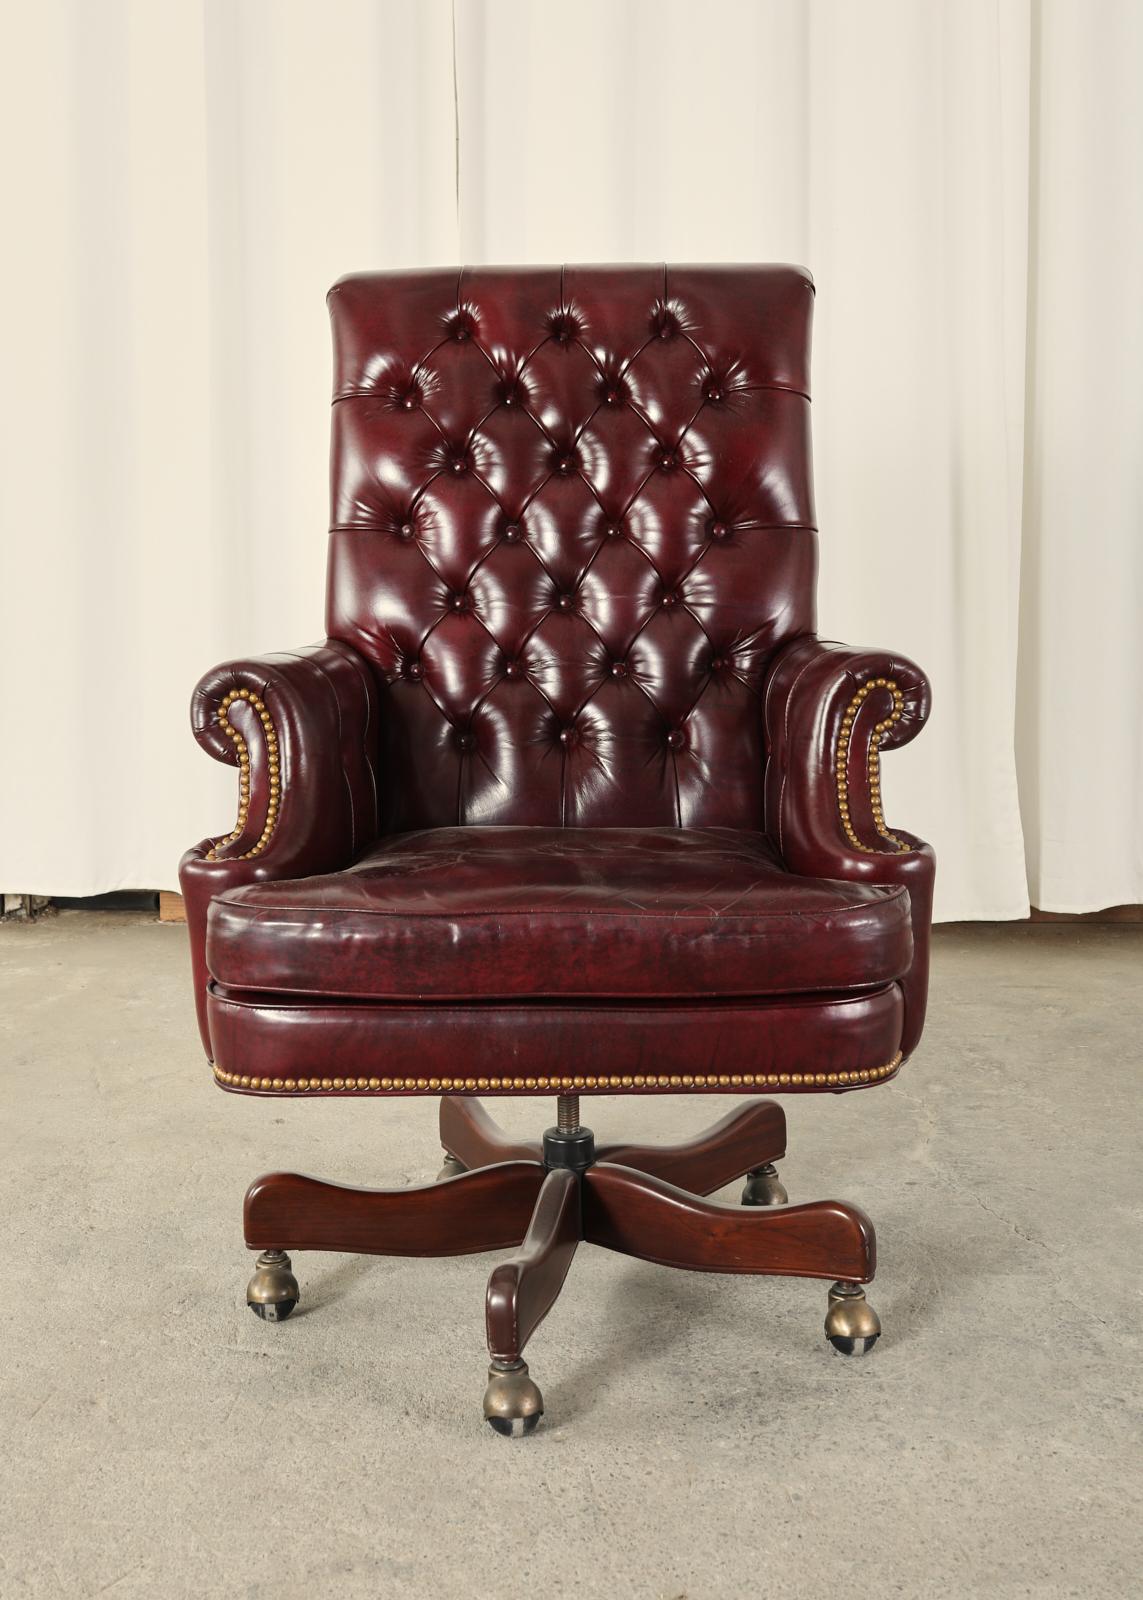 Stately executive office desk armchair made in the English chesterfield or regency style. The chair features a soft leather upholstery with a tufted back finished in a rich cordovan or oxblood red shade with a subtly marbled detail. The seat has